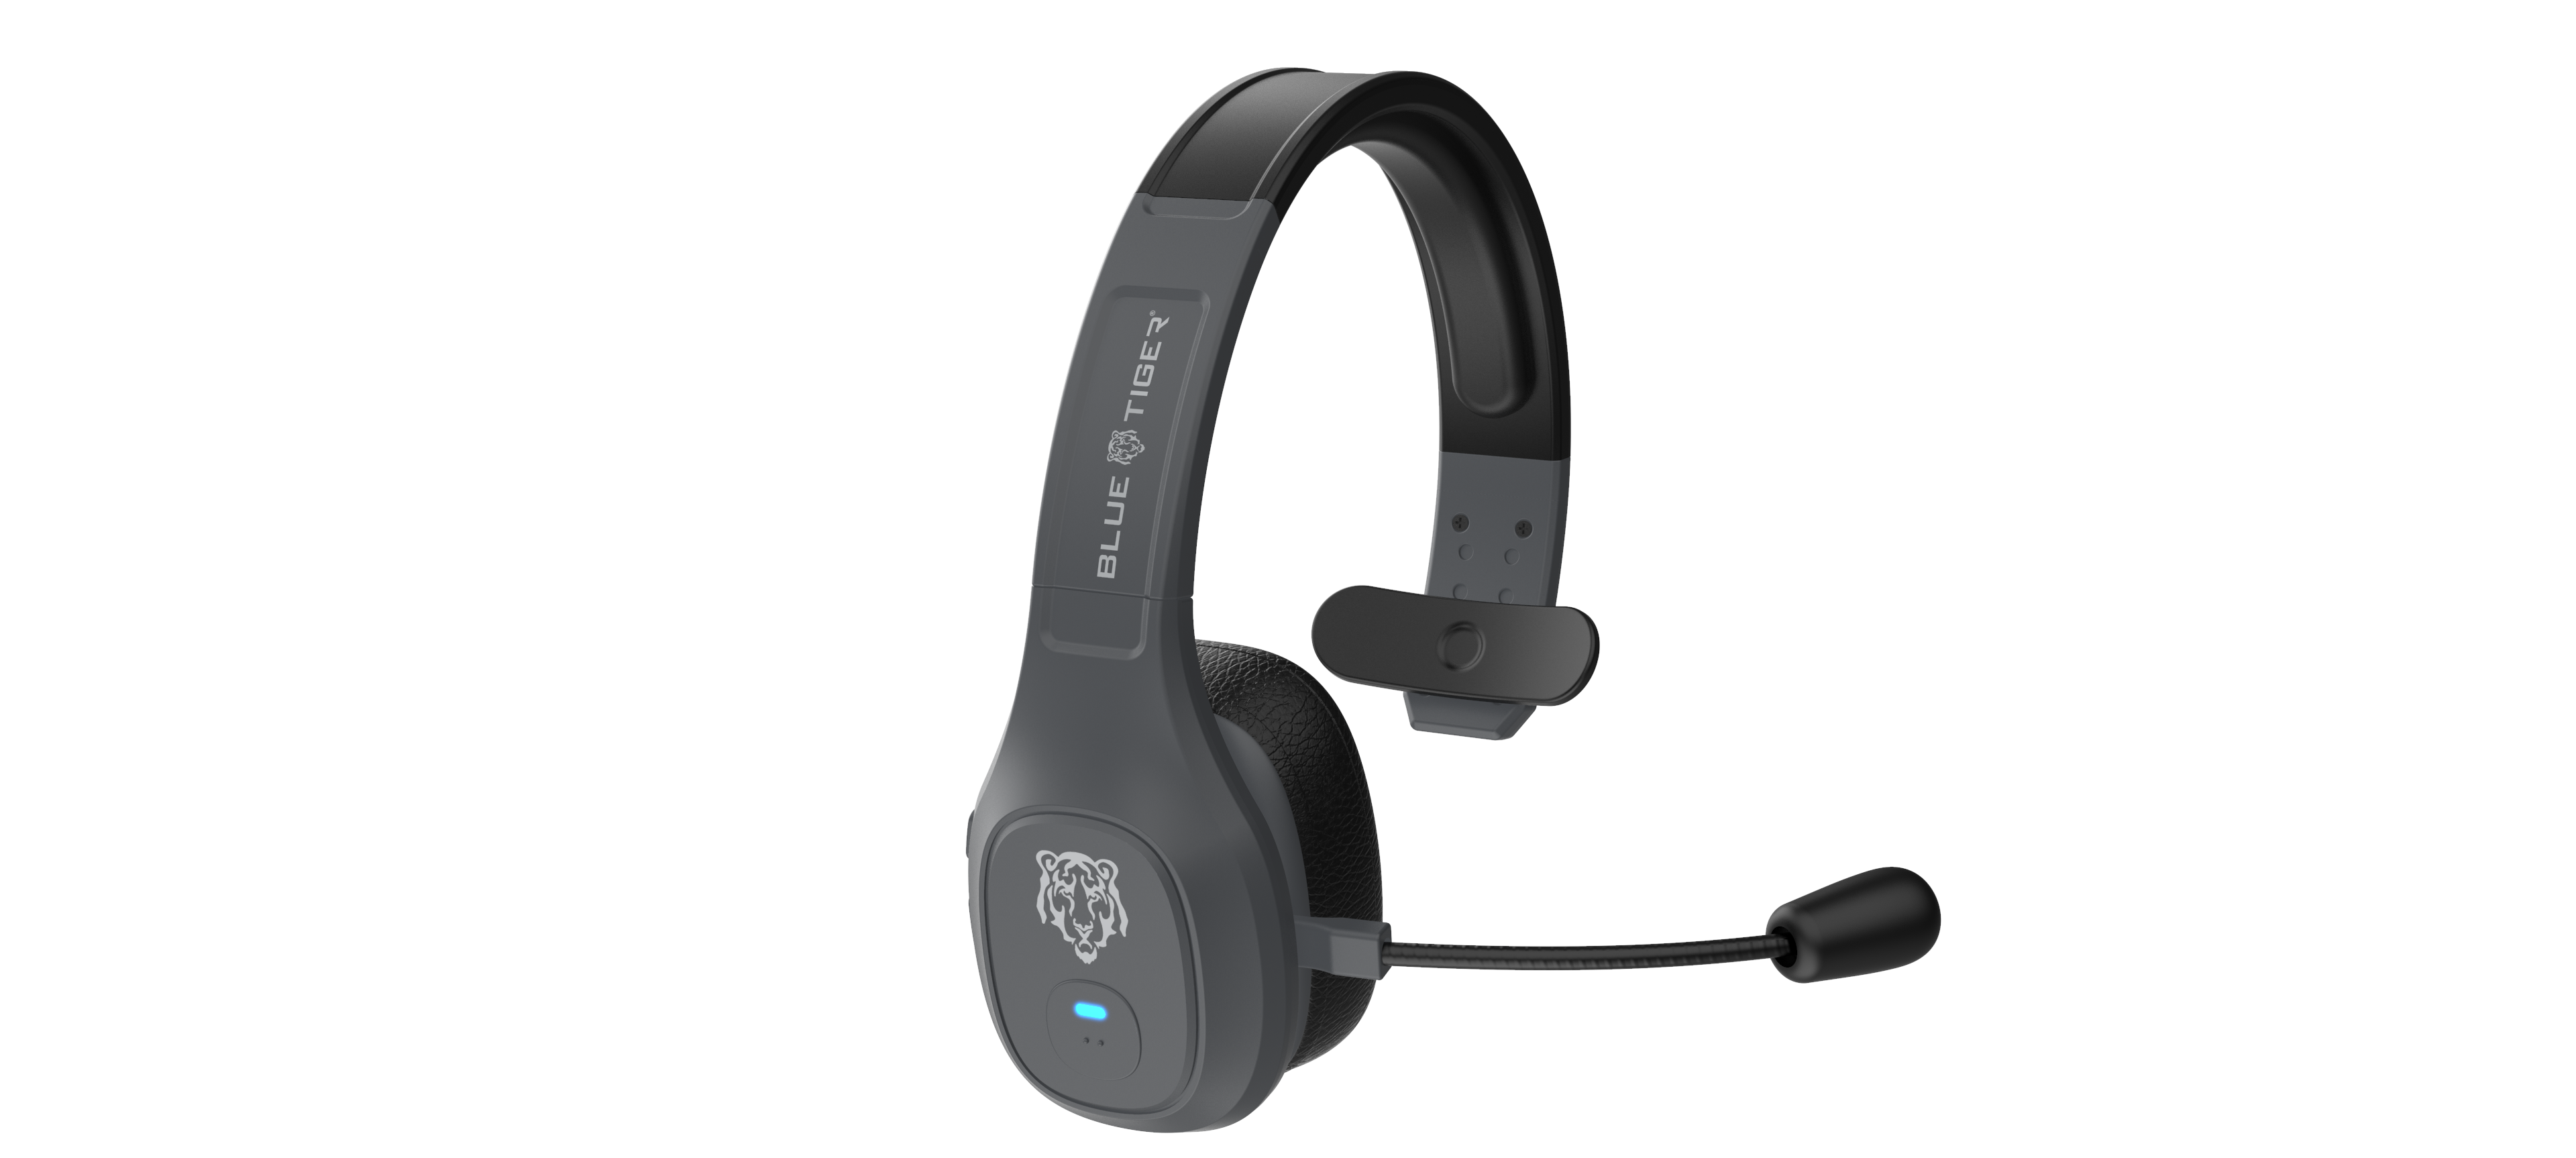 The Storm, Single Ear, Noise Cancellation Bluetooth Microphone A. Guys, Your Access Technology Experts